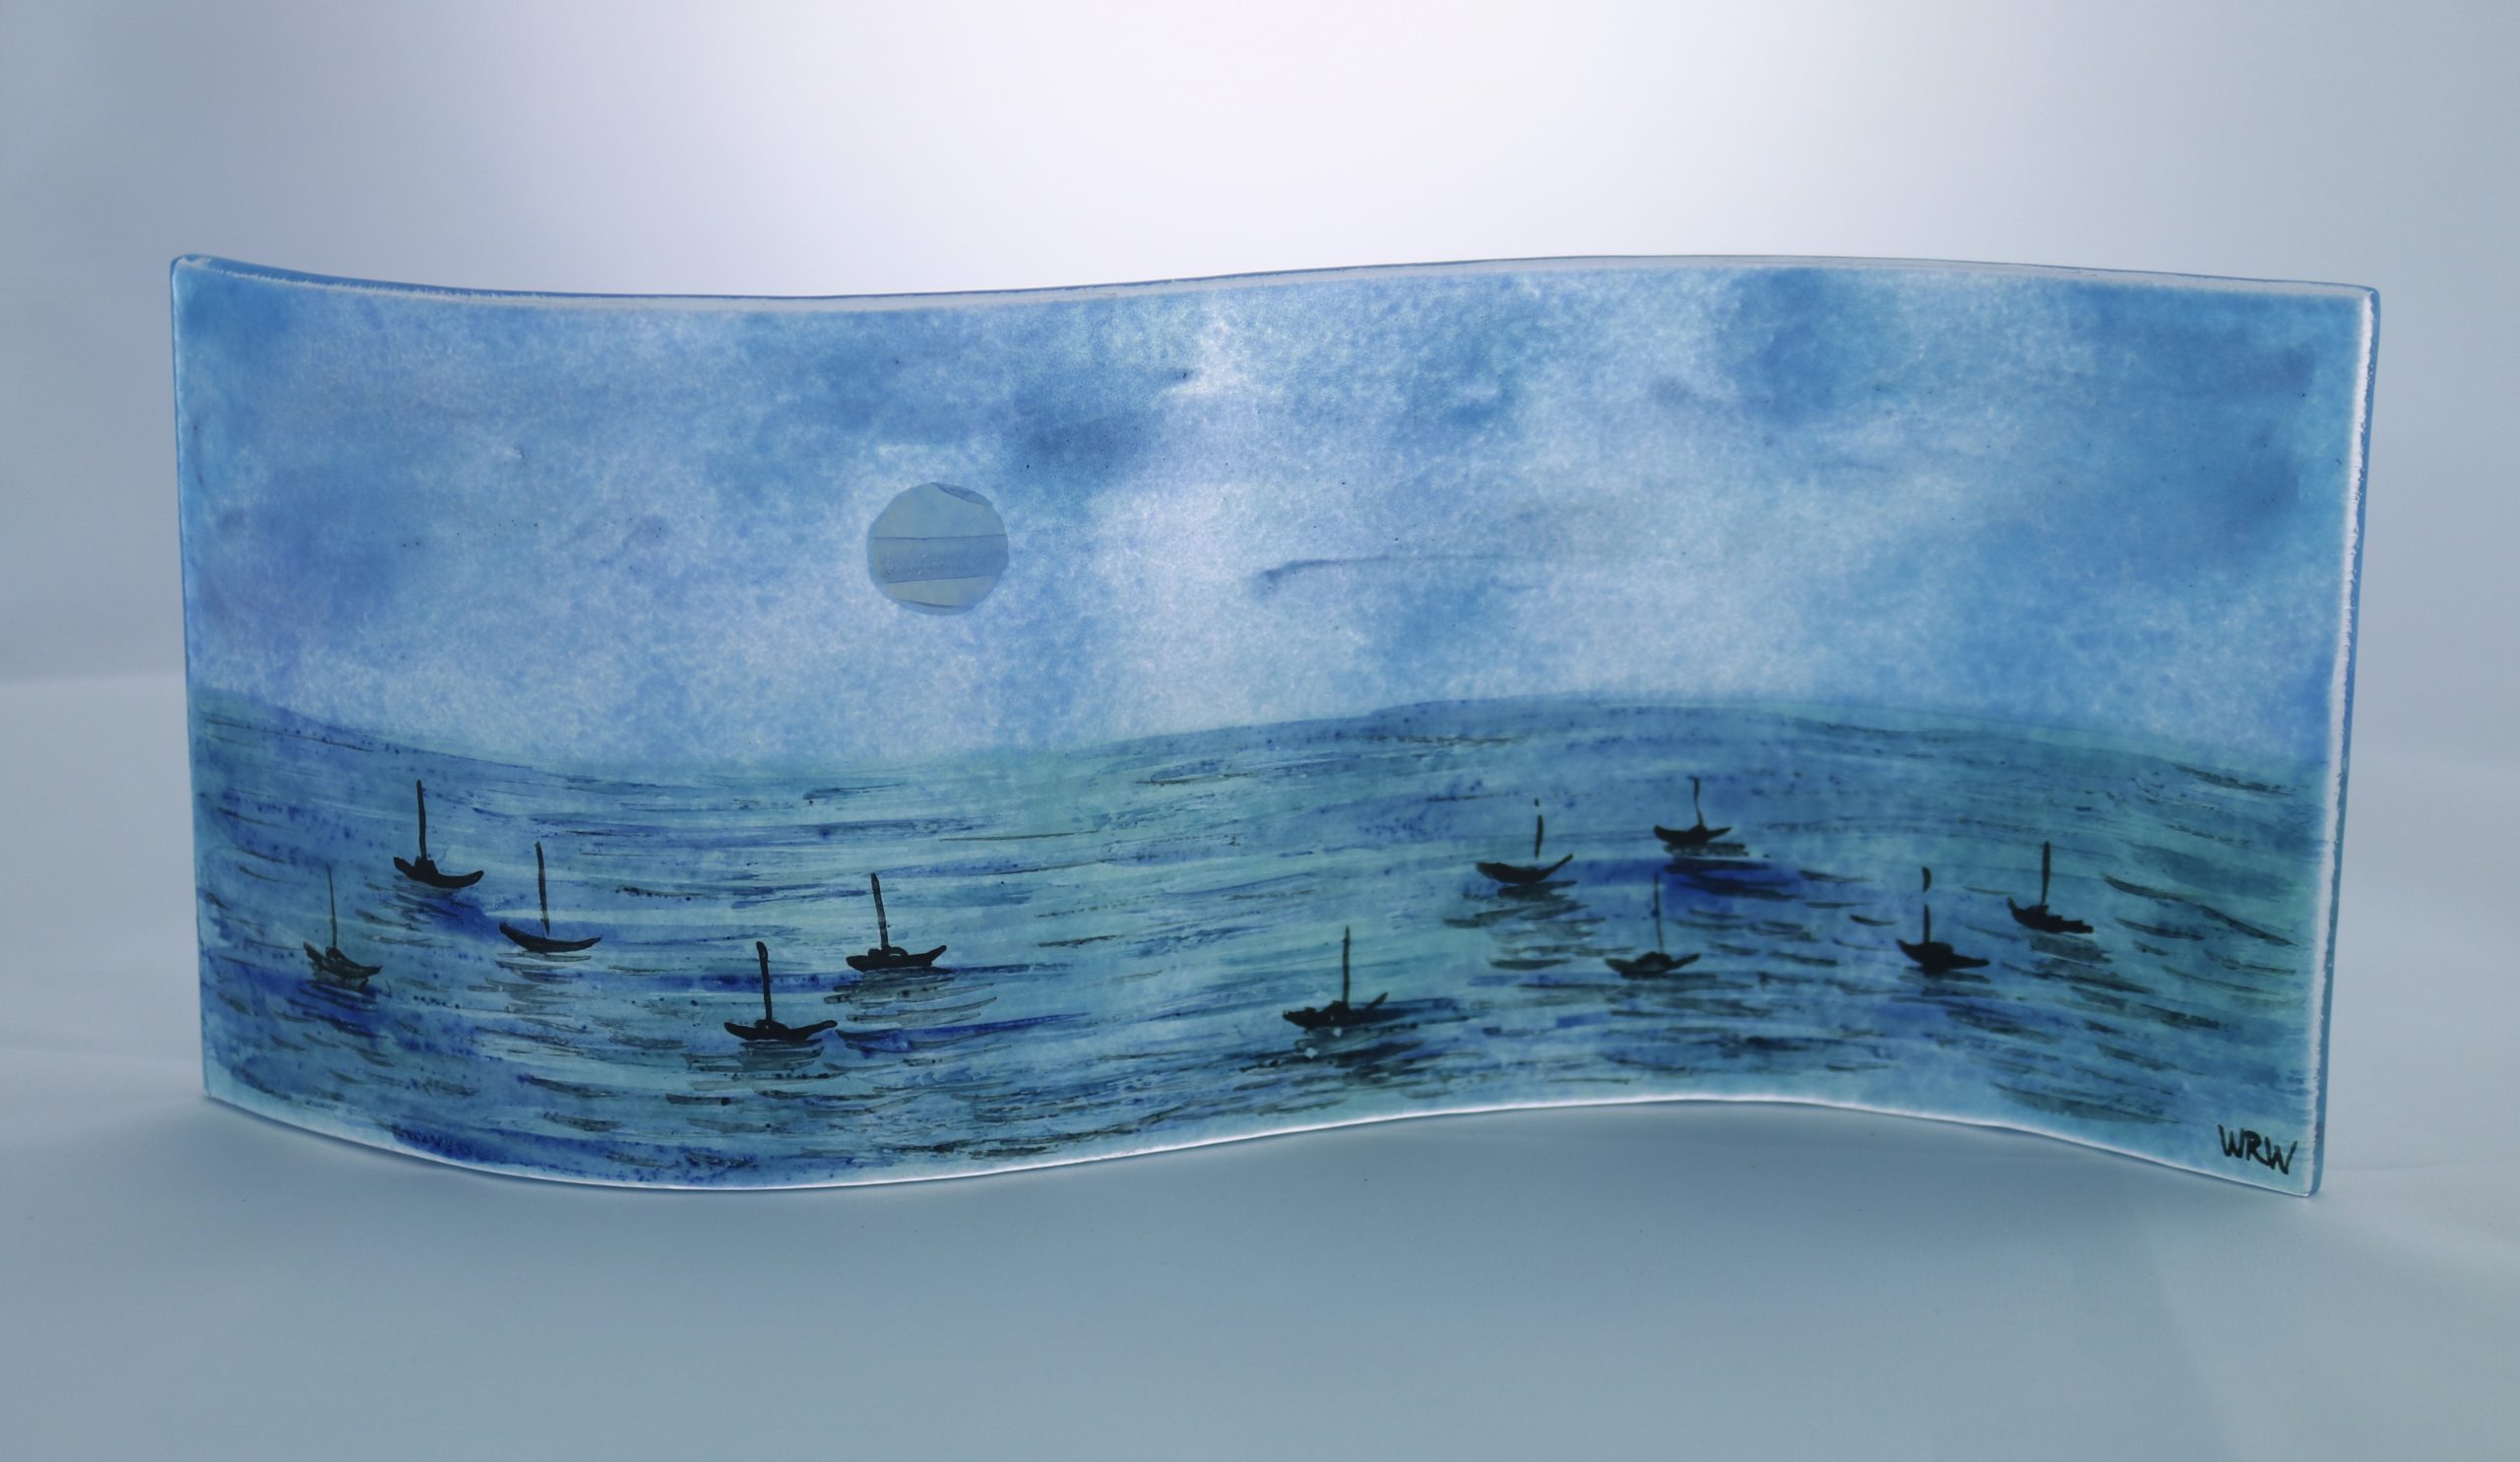 Handpainted fused glass panel with moonlit sea and silhouettes of tiny boats